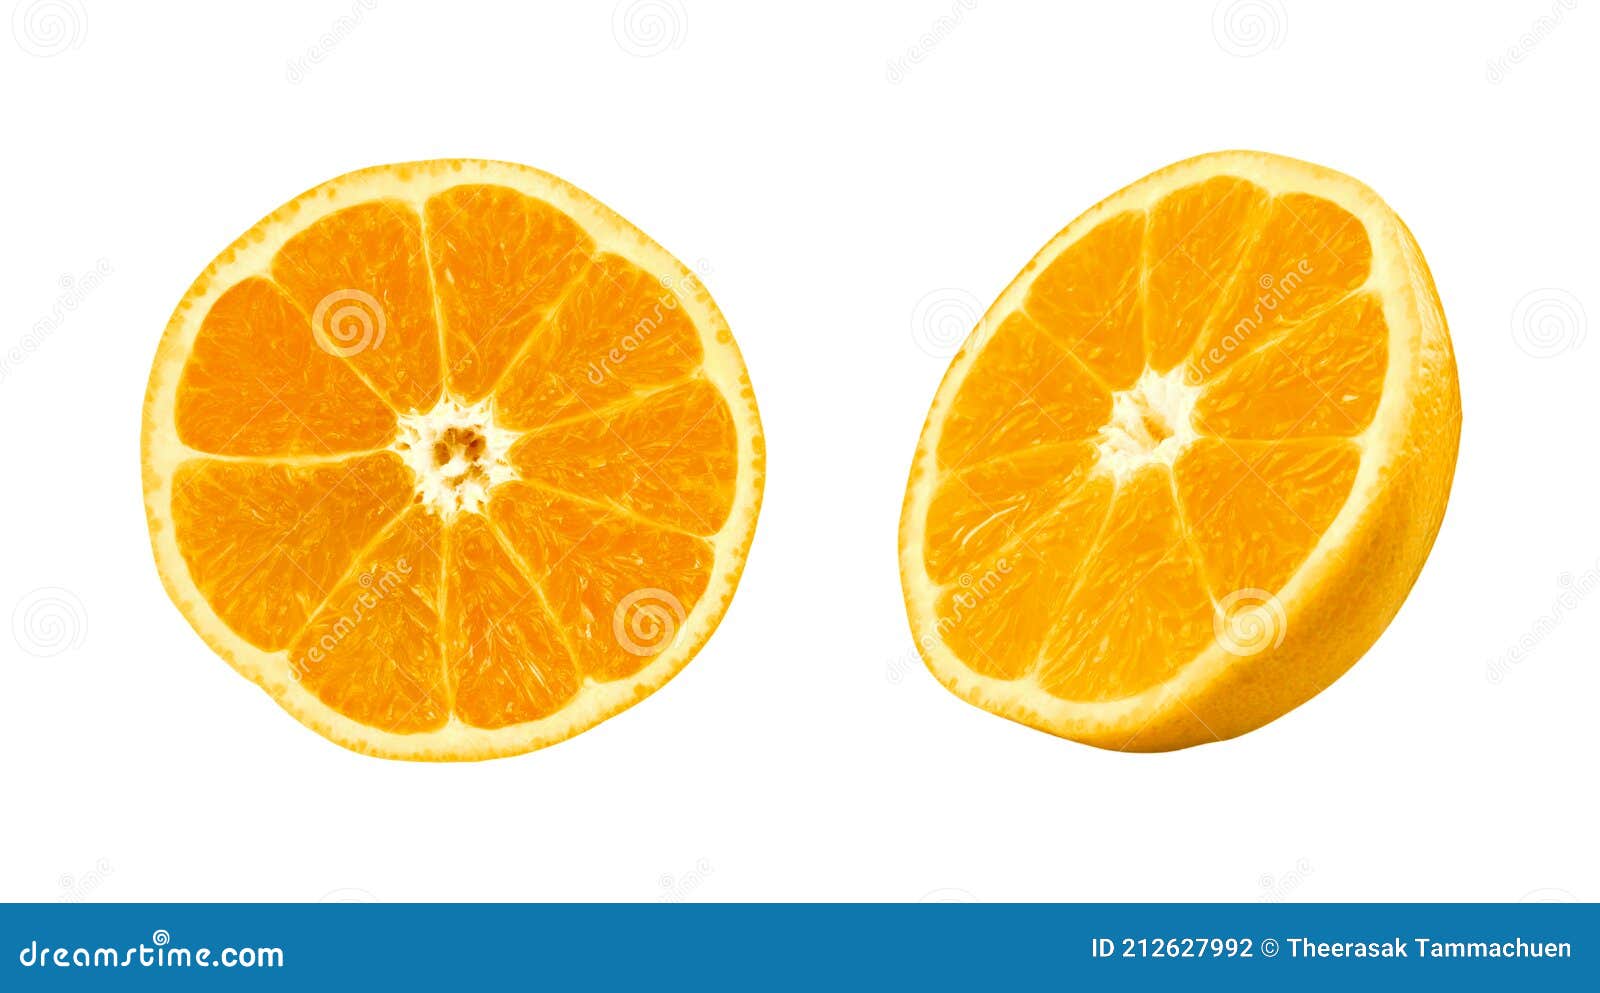 Orange Fruit Cut in Half Isolated on White Background. Clipping Path ...